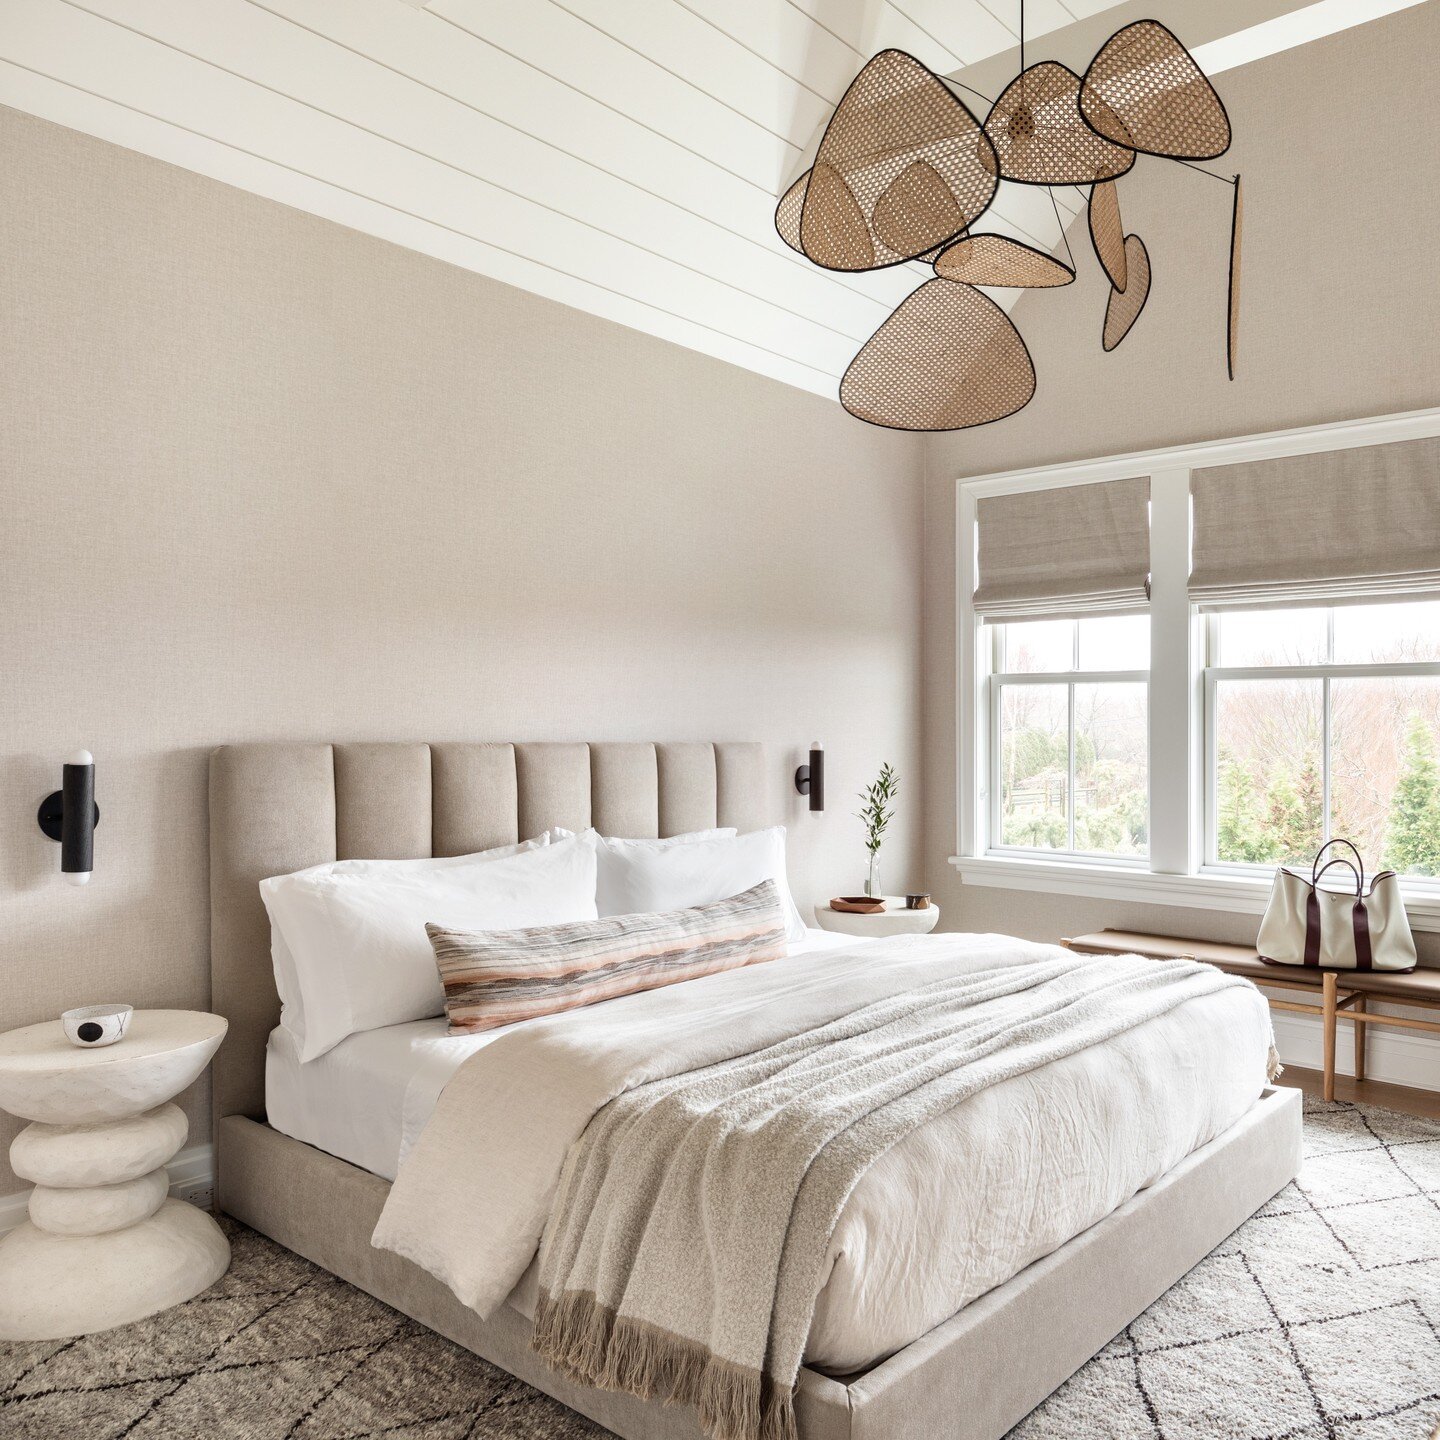 Counting the days till summer...beachy feels from this hamptons bedroom - design #amykalikowdesign photo @reganwoodphoto